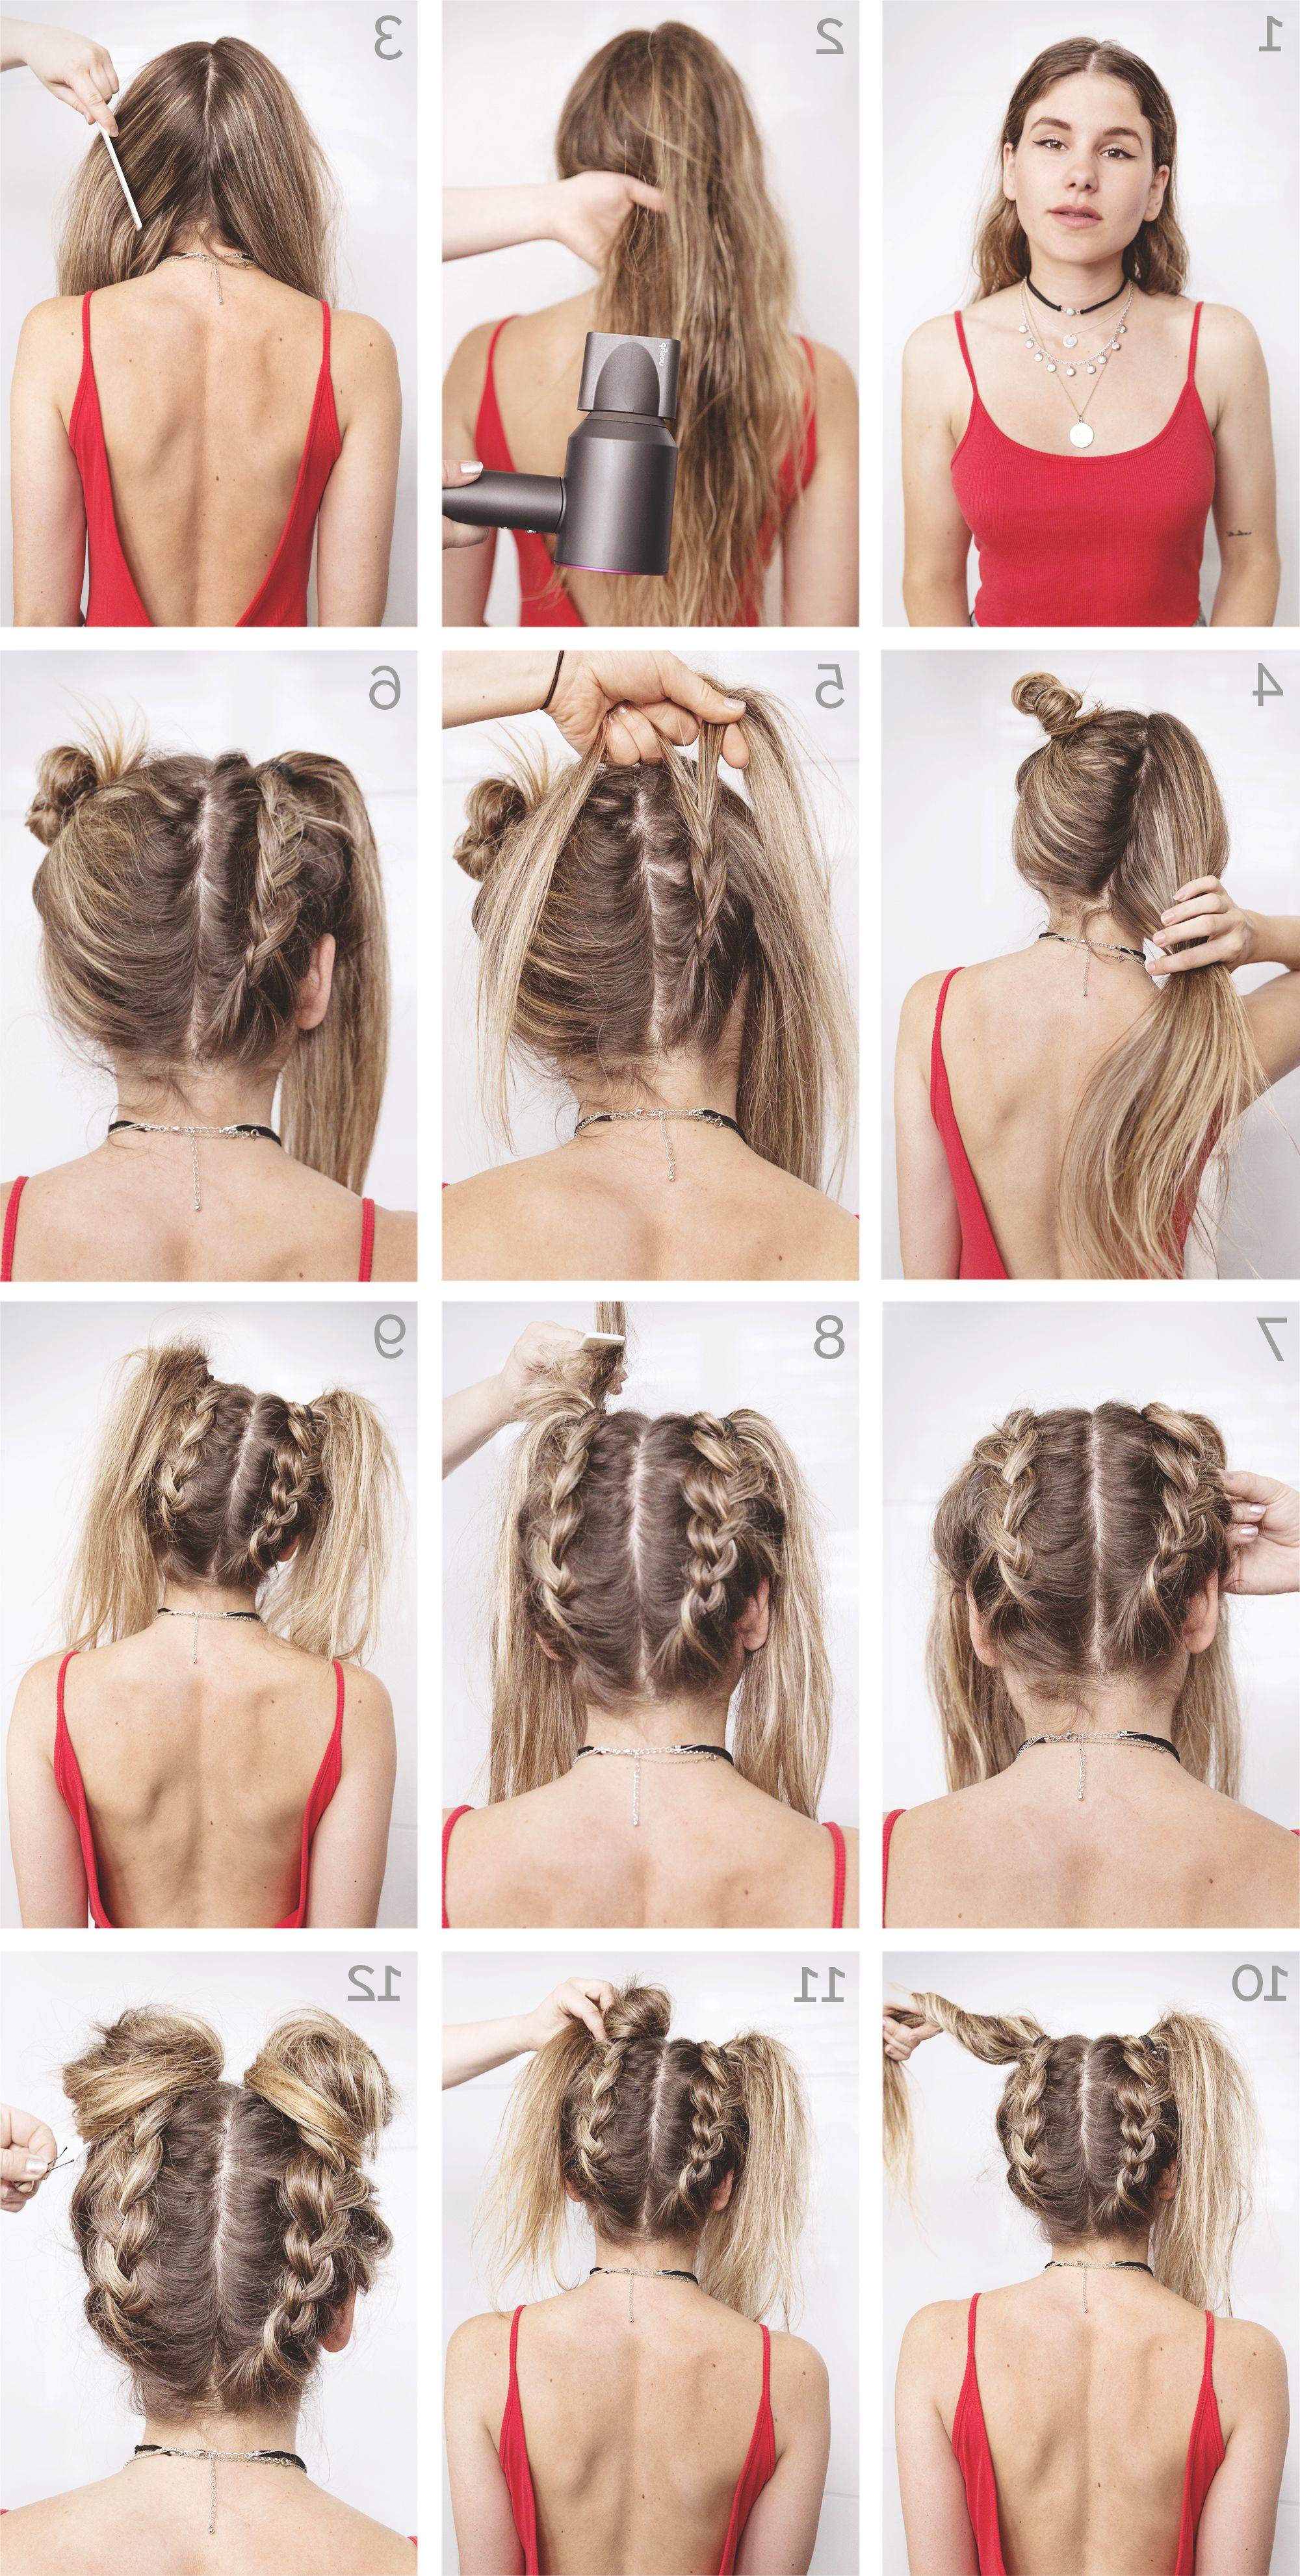 Widely Used Braided Space Buns Updo Hairstyles For Tutorial: Space Buns – Festival Hair › Thefashionfraction (View 10 of 20)